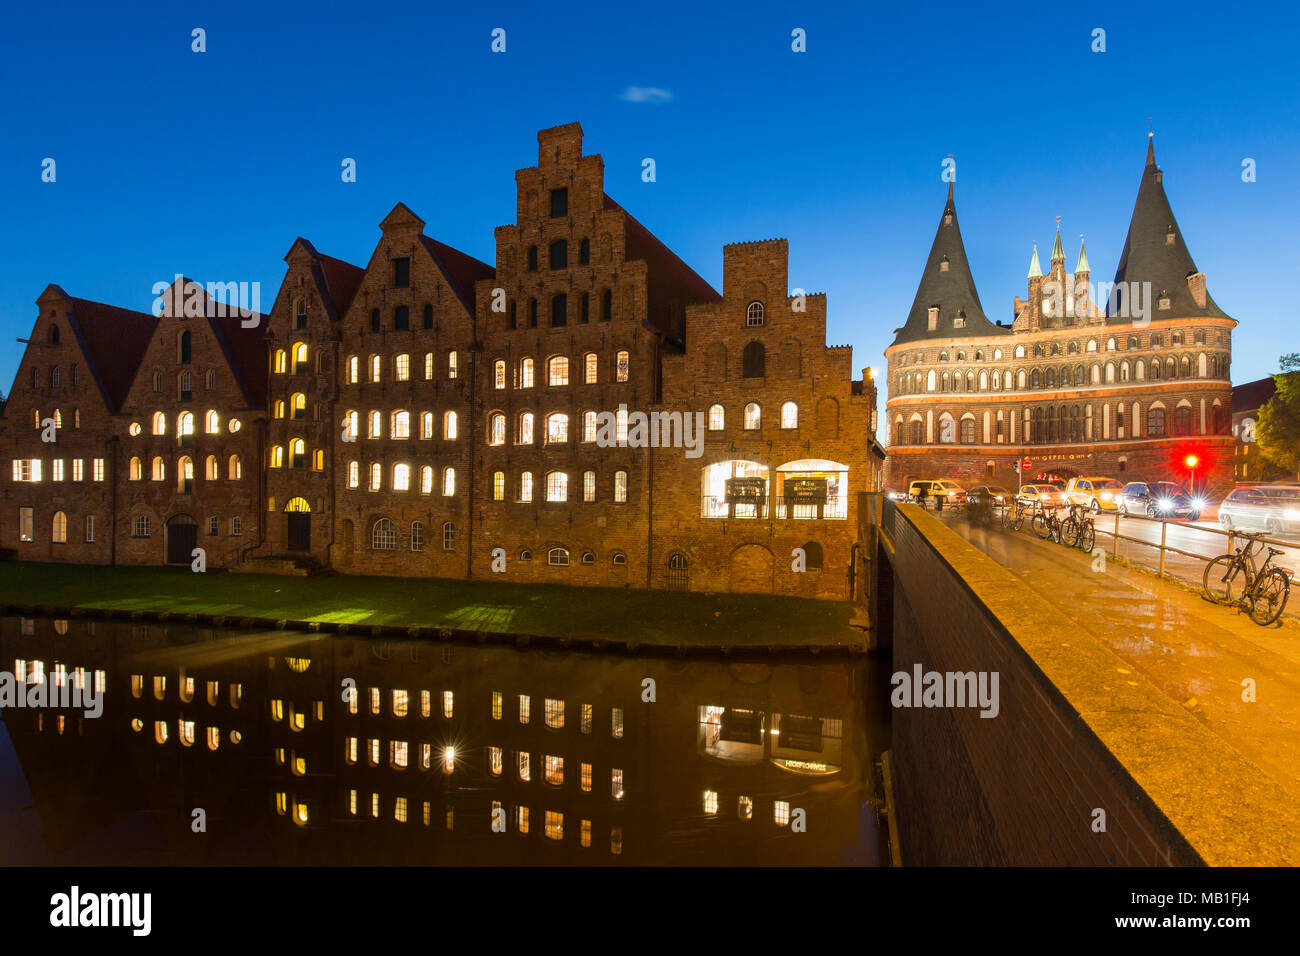 Salzspeicher / salt storehouses at night along the Upper Trave River in the Hanseatic town Lübeck / Luebeck, Schleswig-Holstein, Germany Stock Photo